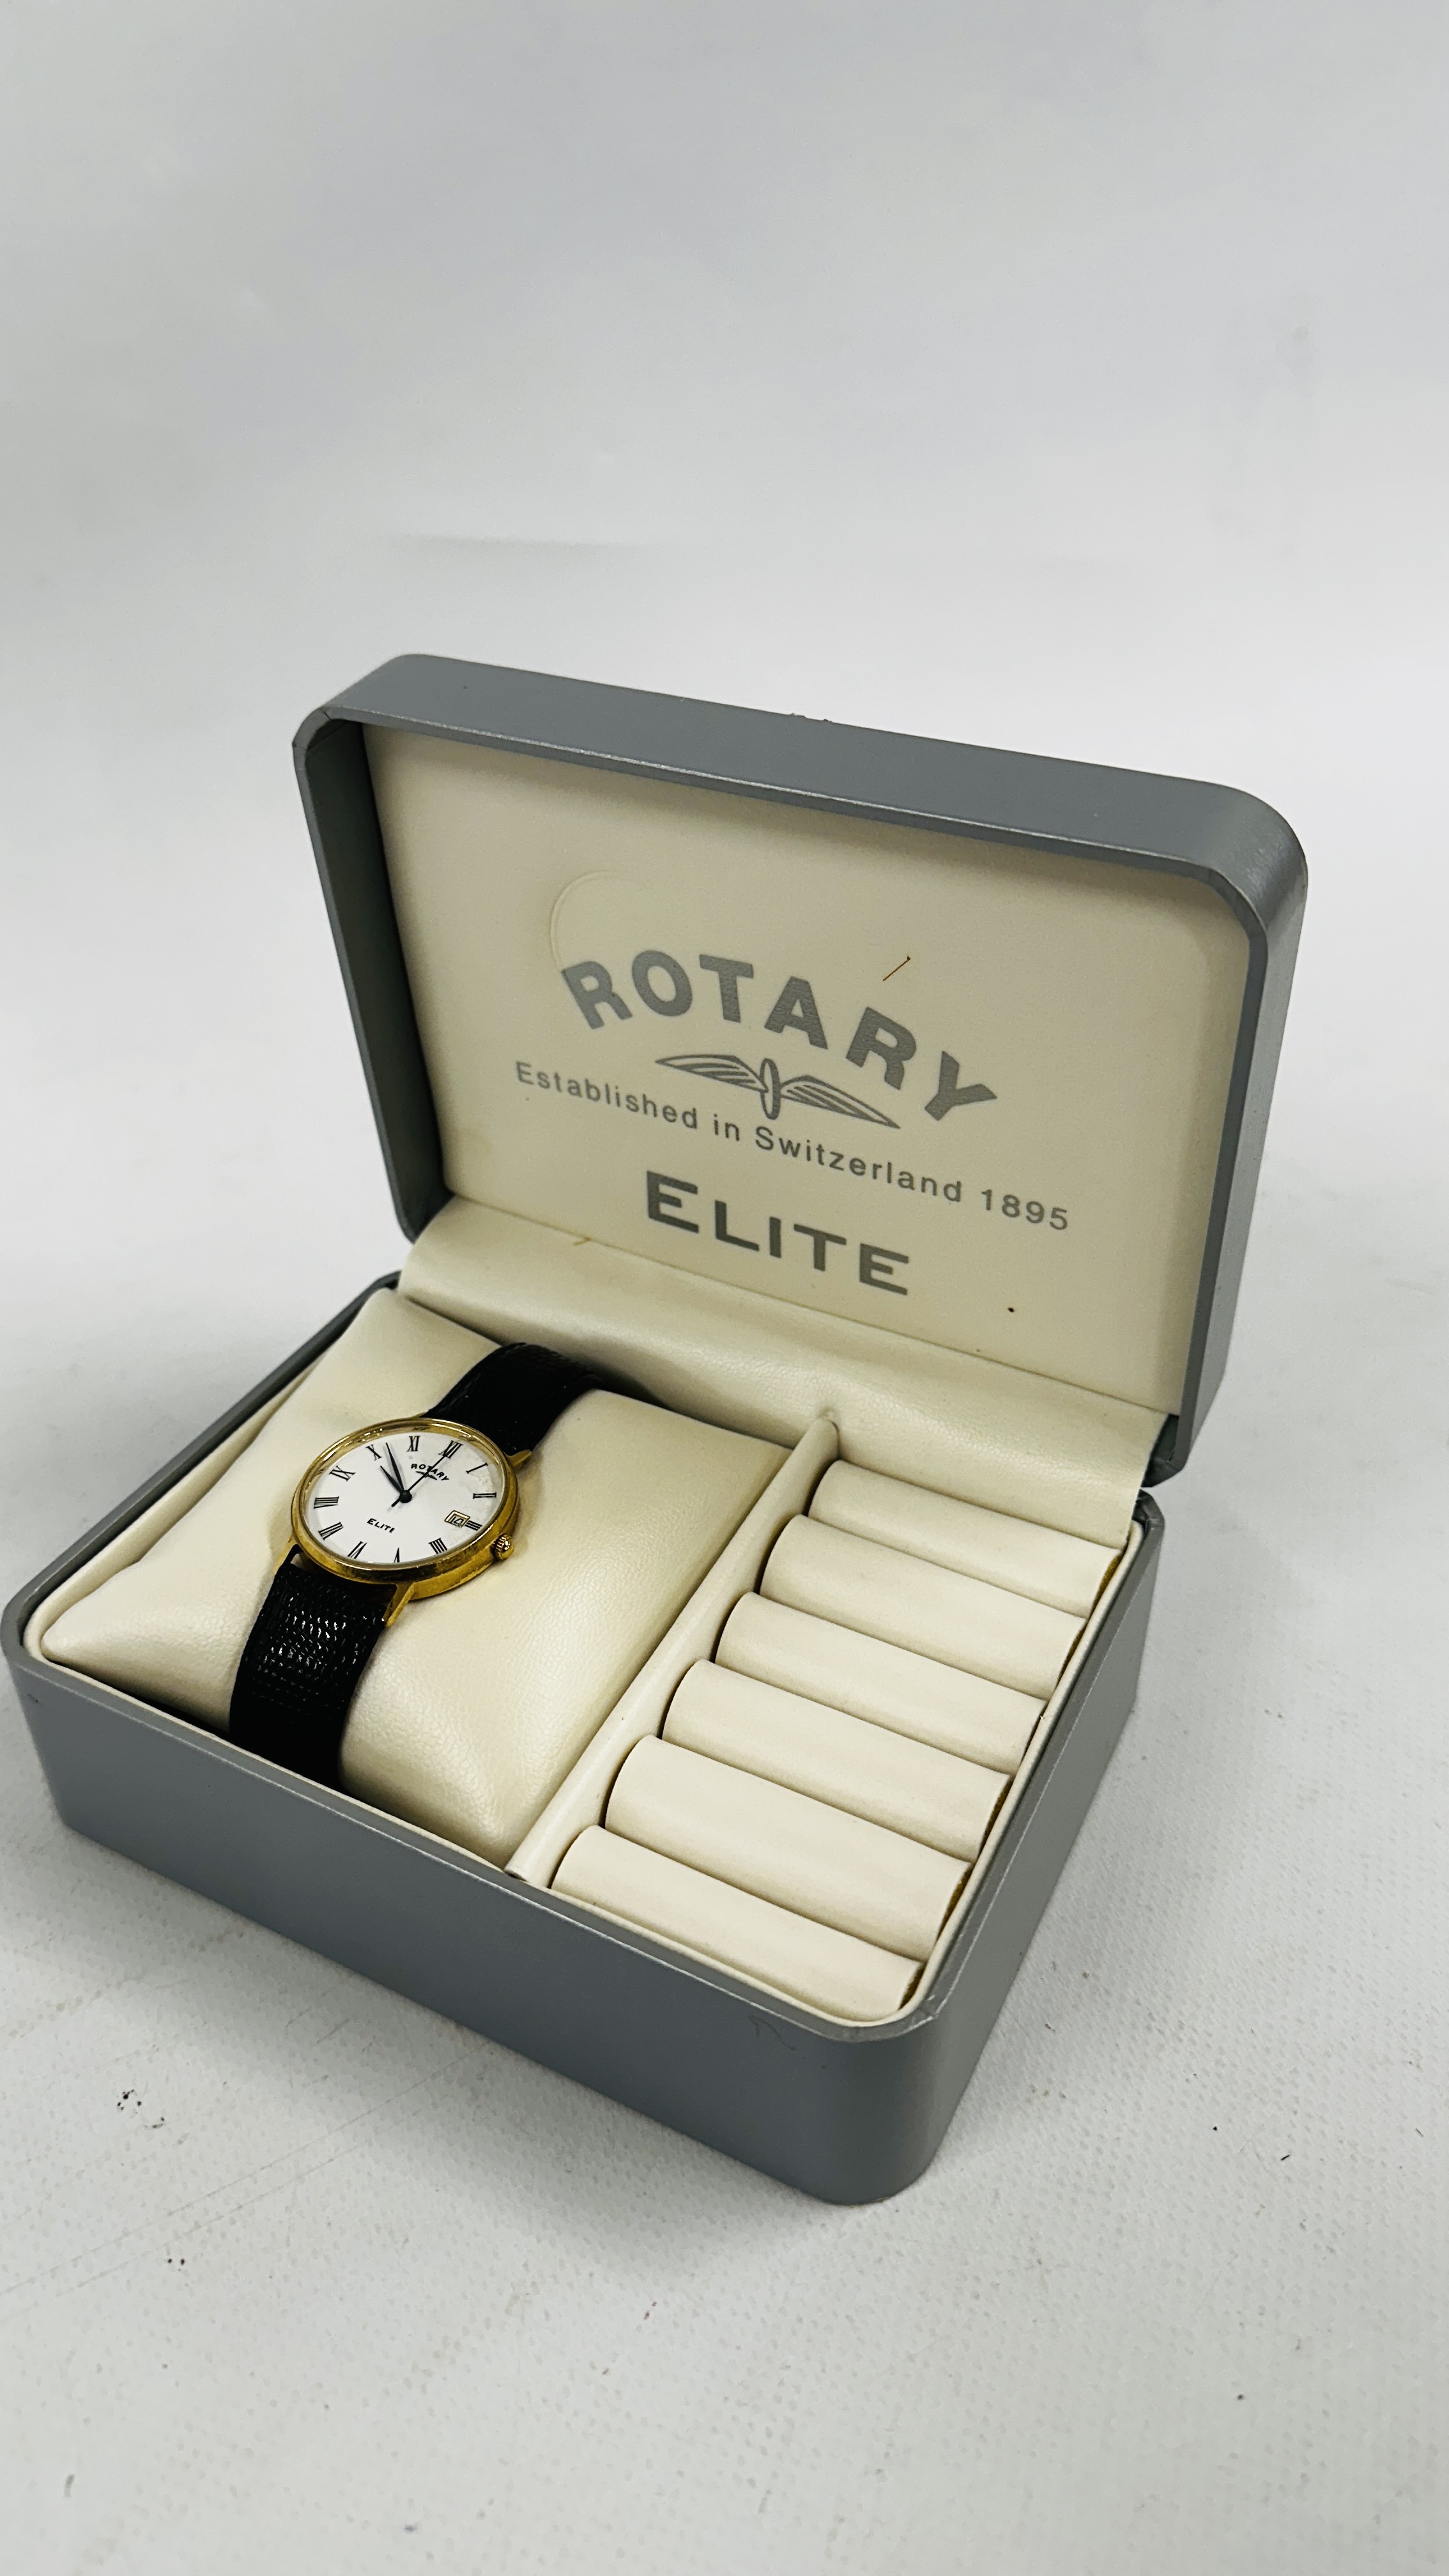 A GENT'S ROTARY ELITE 9CT GOLD CASED WRIST WATCH ON A BLACK LEATHER STRAP (BOXED).